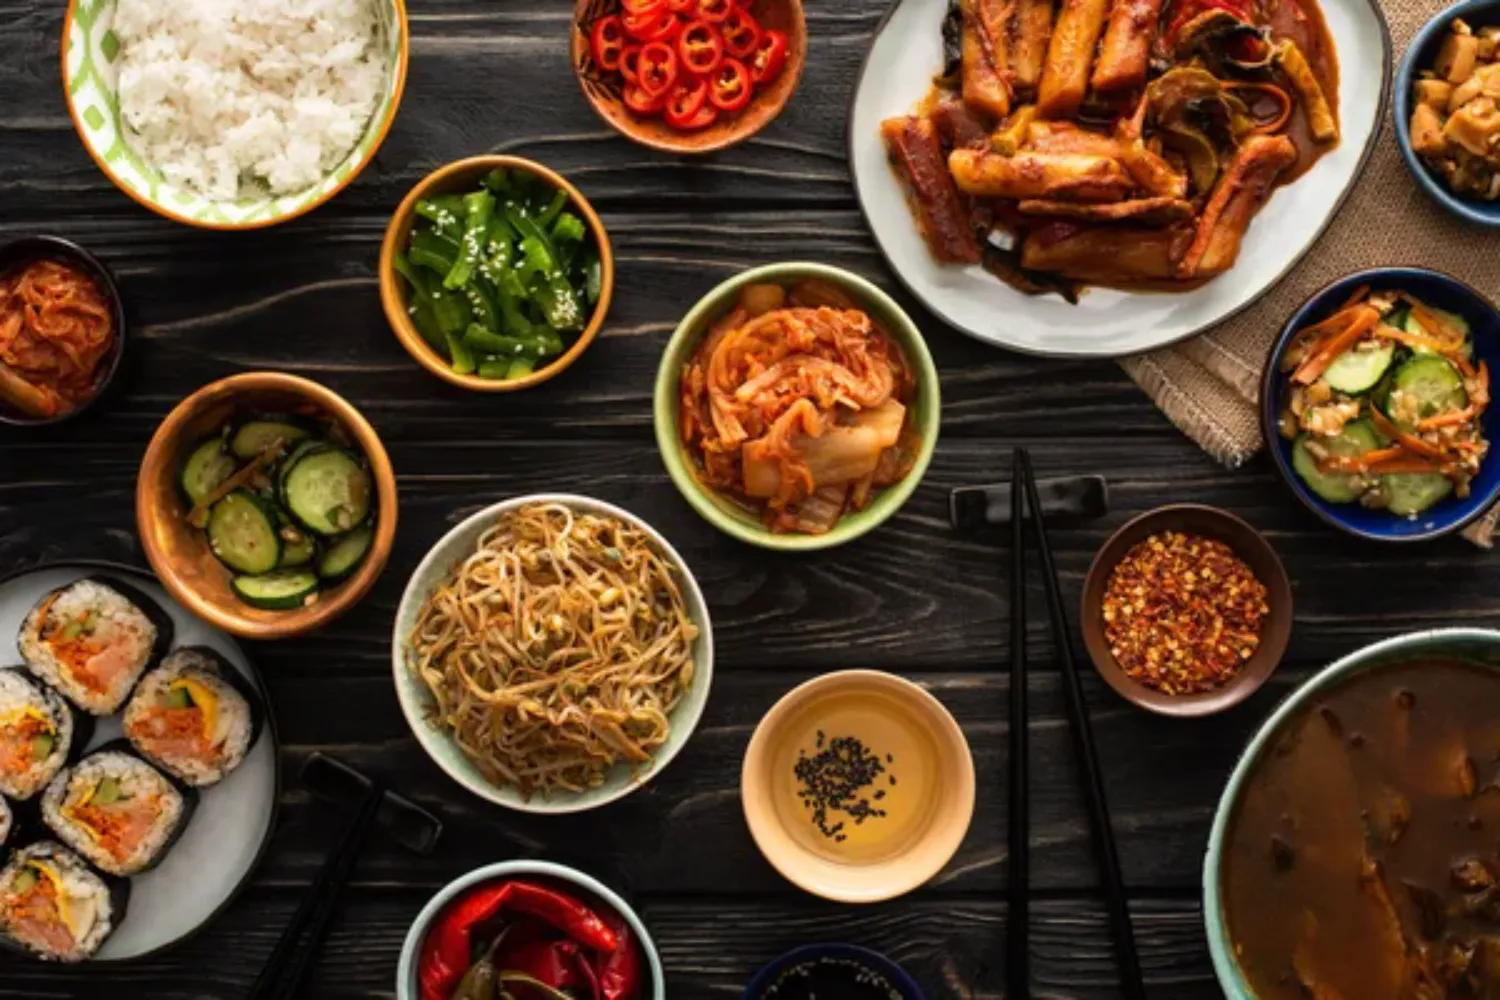 Discover Korean Cuisine with These 10 Delicious Dishes